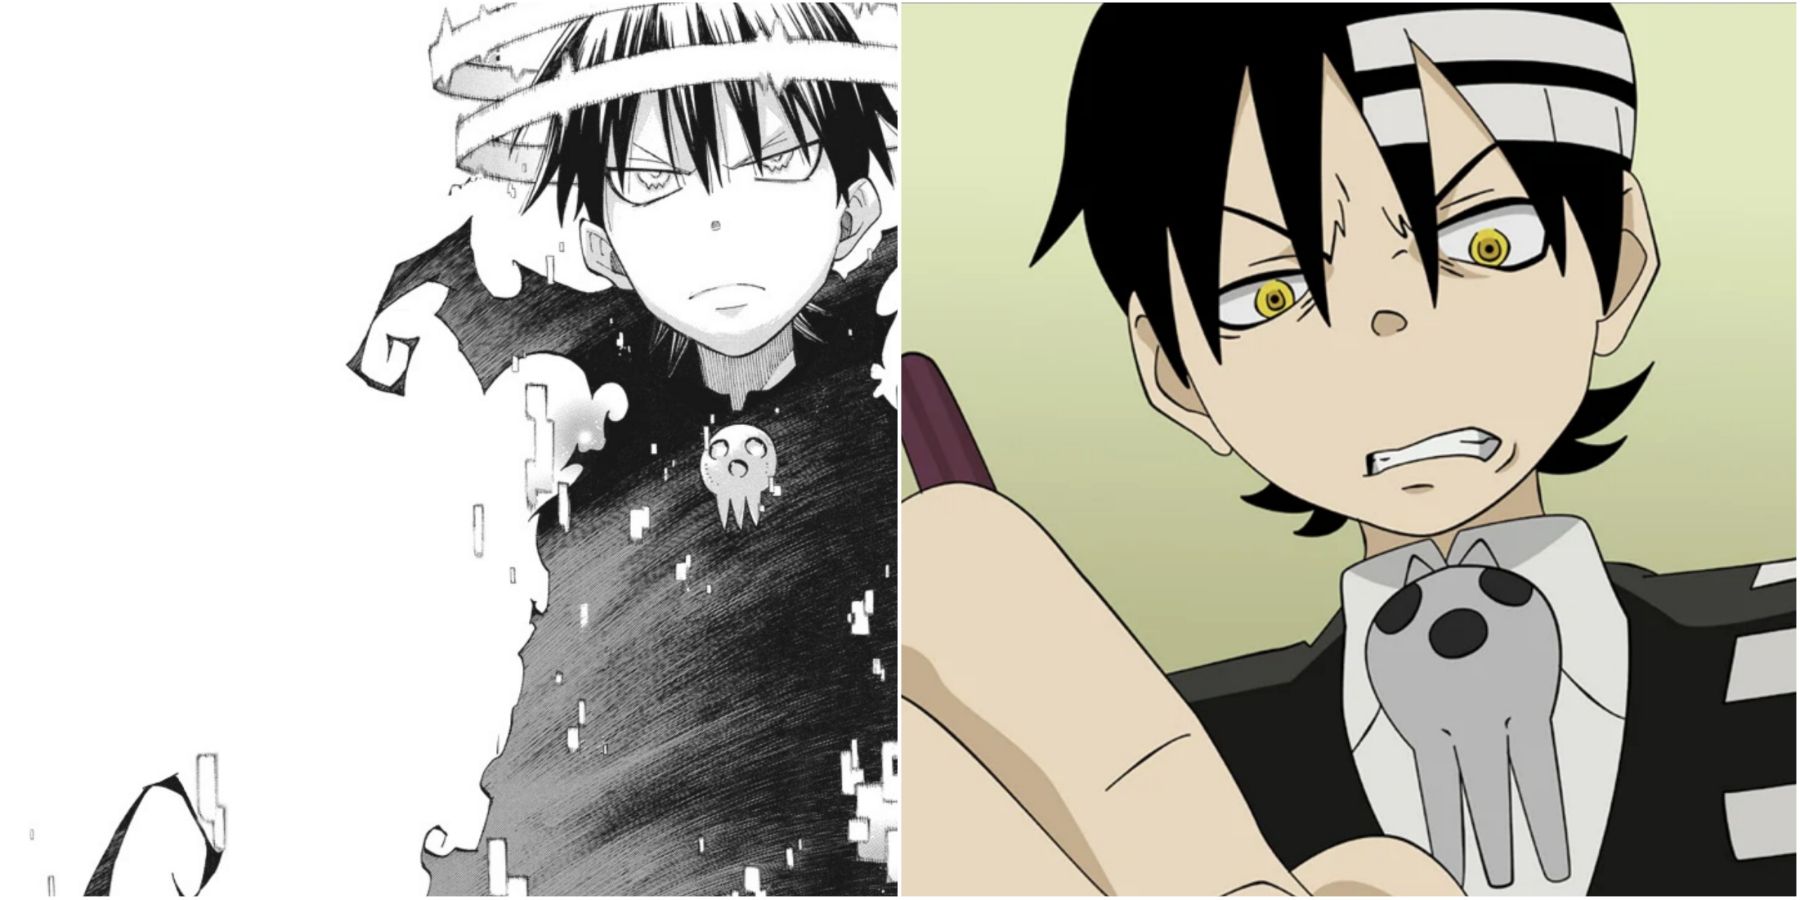 Soul Eater: The Biggest Differences Between The Anime & Manga